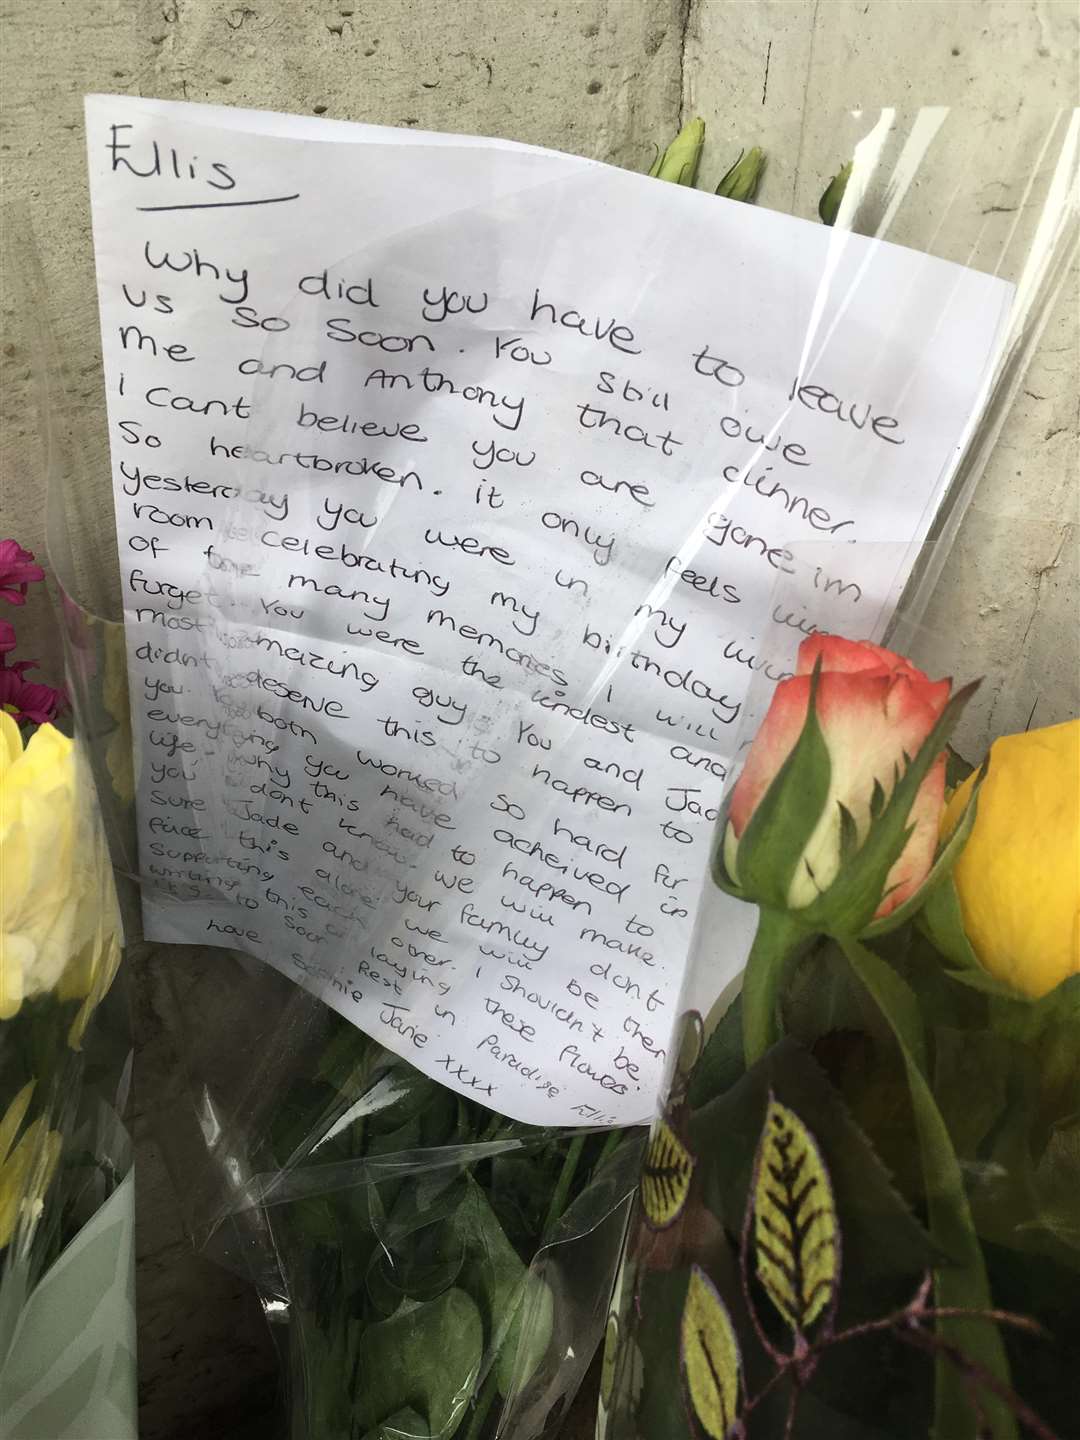 Floral tributes were left in Wateringbury for 21-year-old Ellis Overy who died in a motorcycle crash